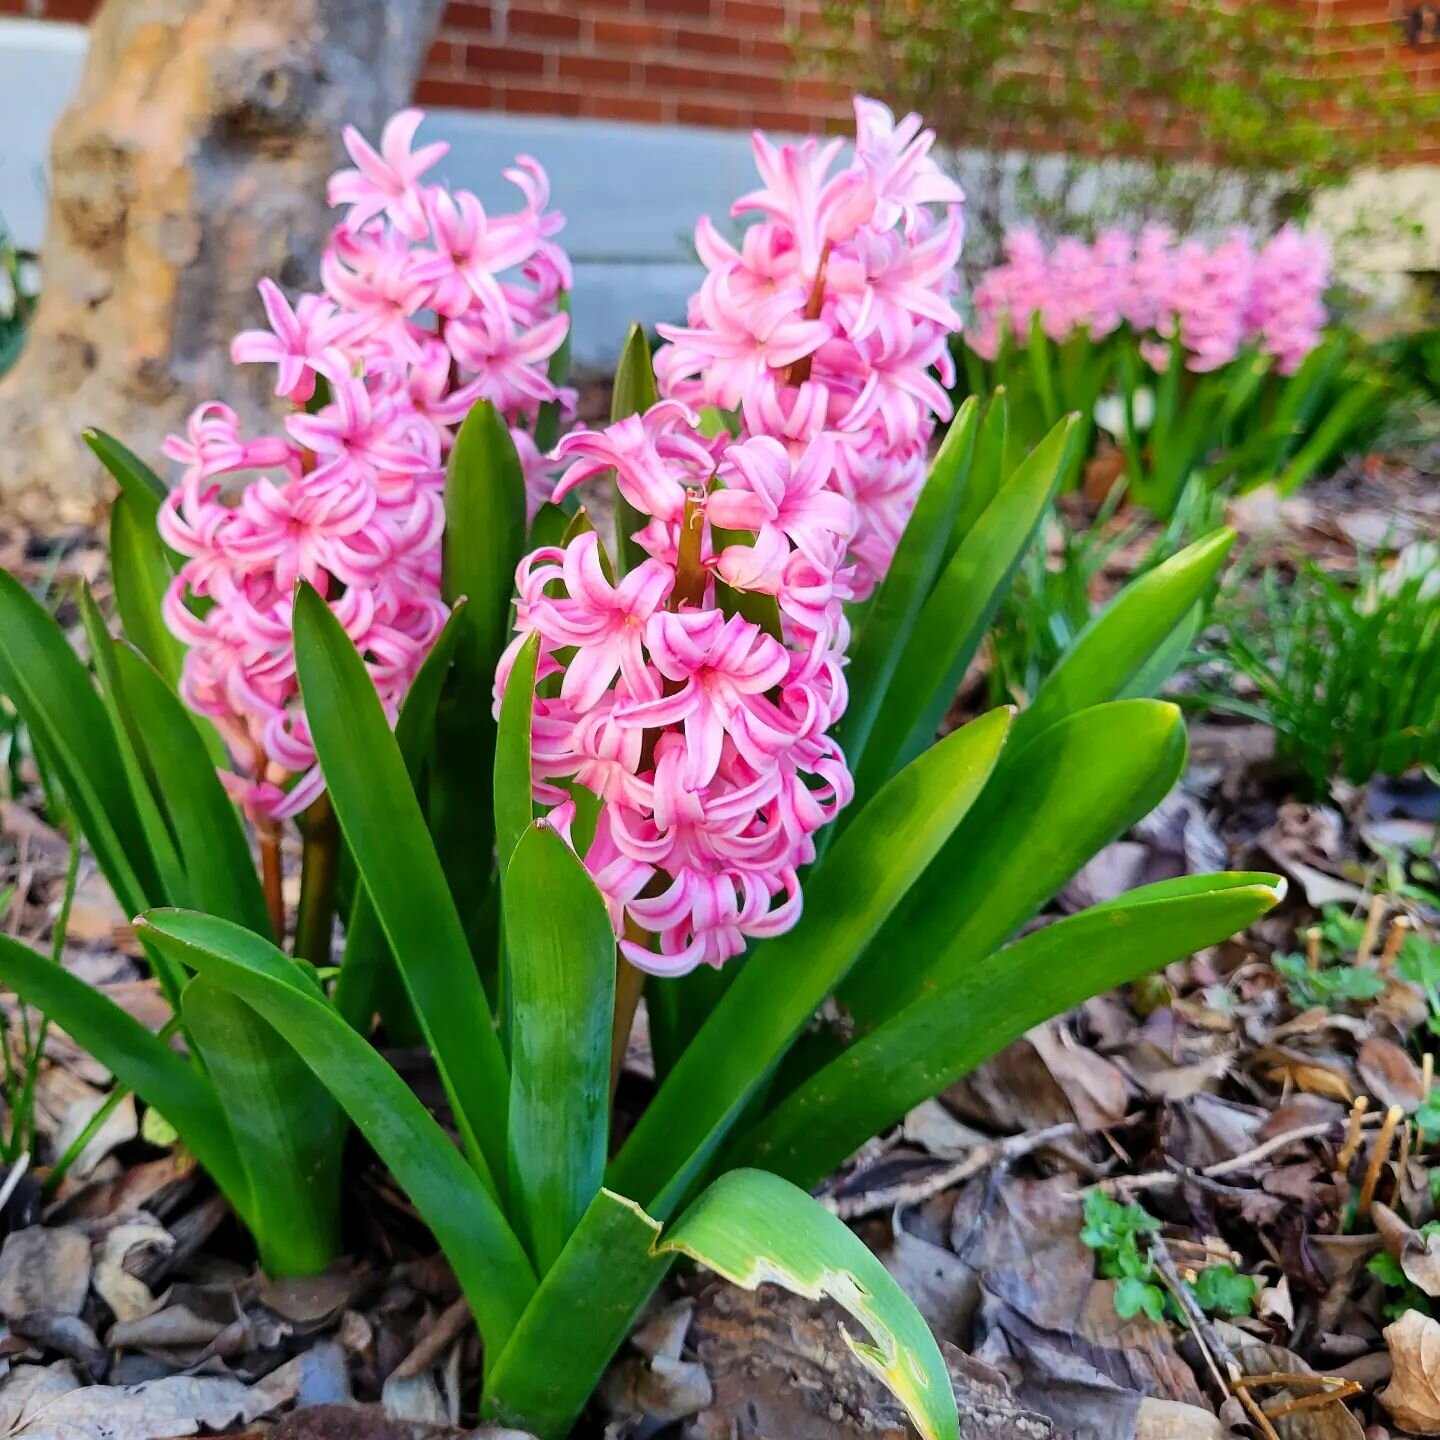 Happy spring equinox! 🌱

May you bloom into this new season as sweetly as these hyacinths smell. 

And if things feel heavy, may you look upon something beautiful today and remember more light is coming.

[Image is a close up of three pink hyacinths